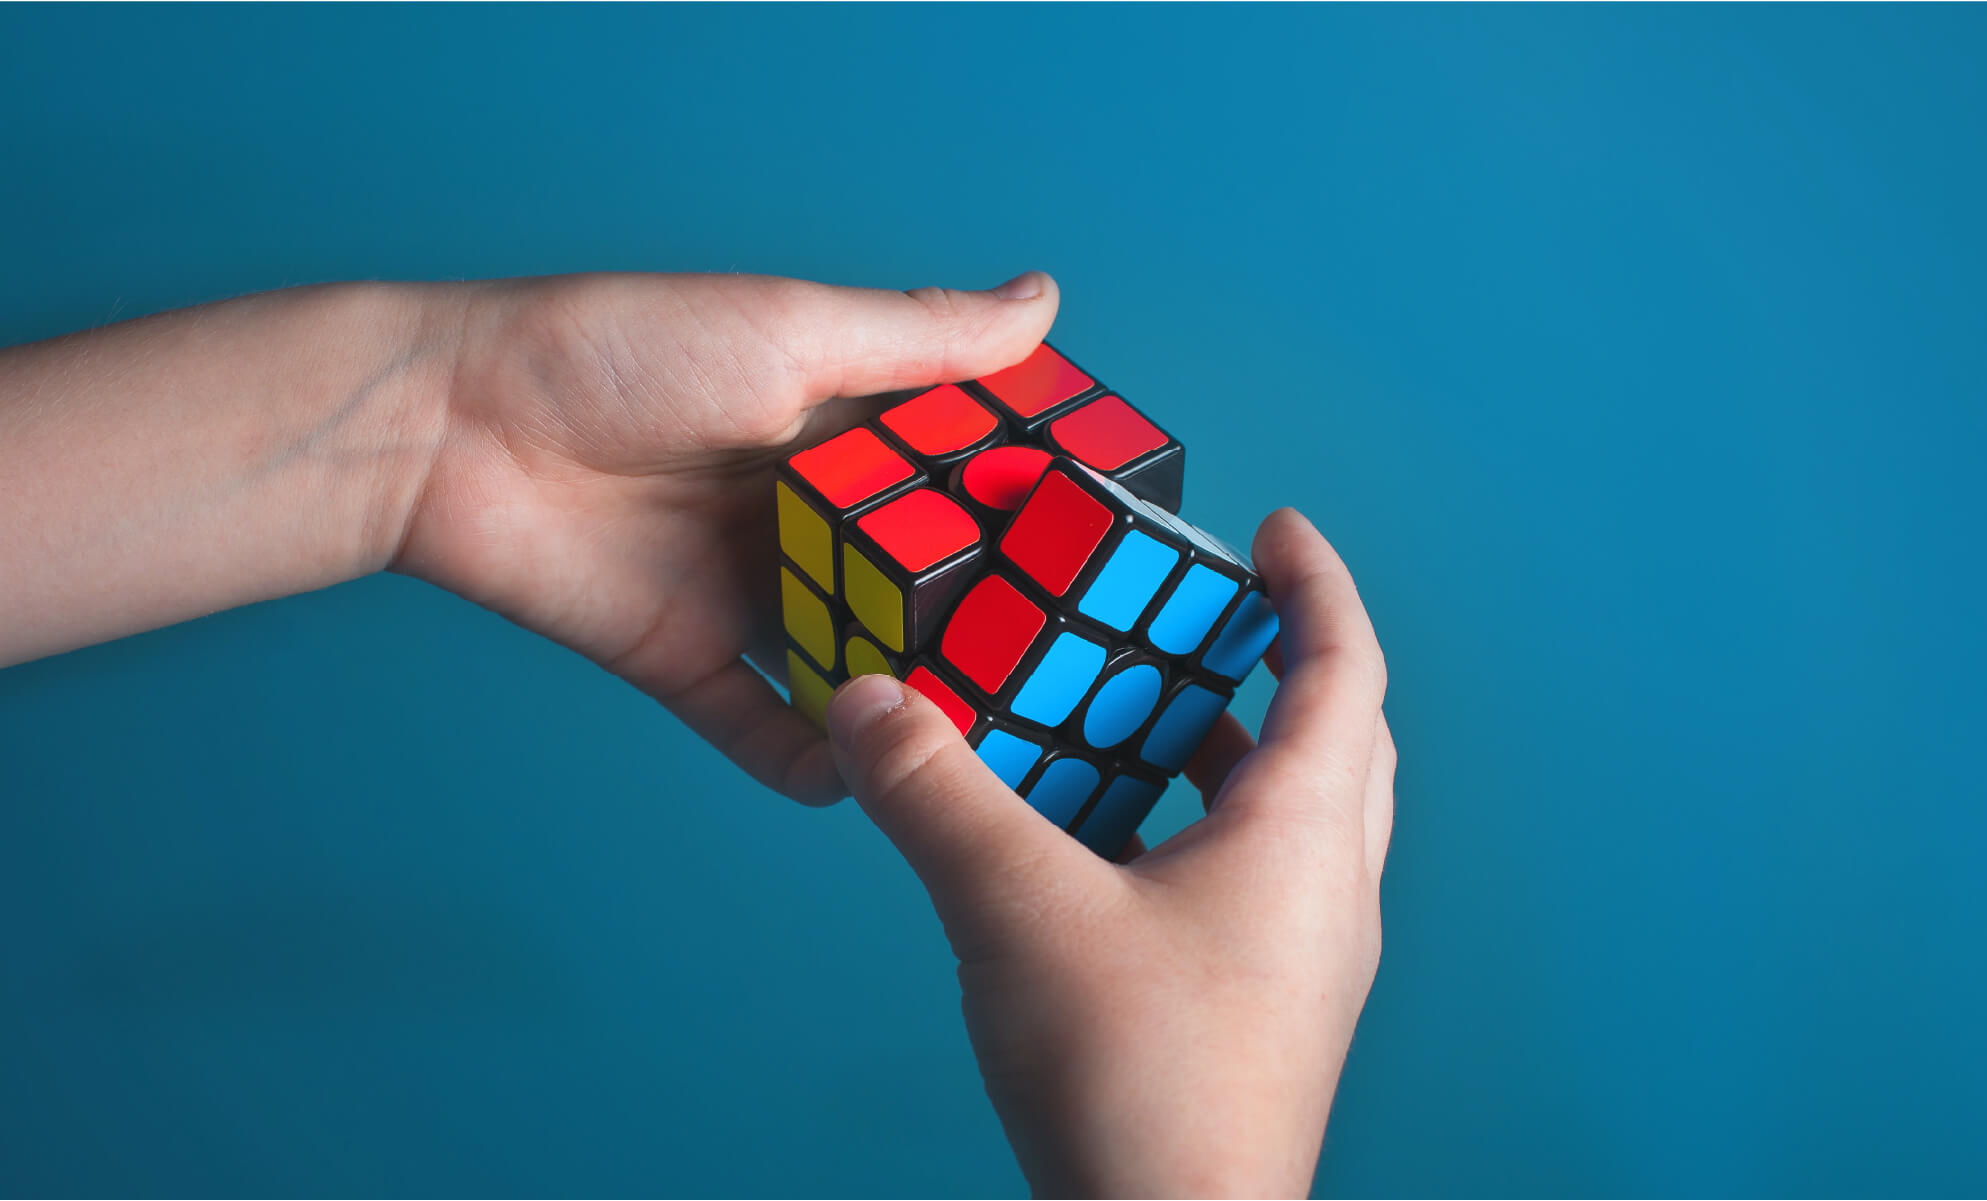 Frustration - Someone solving a Rubik's cube